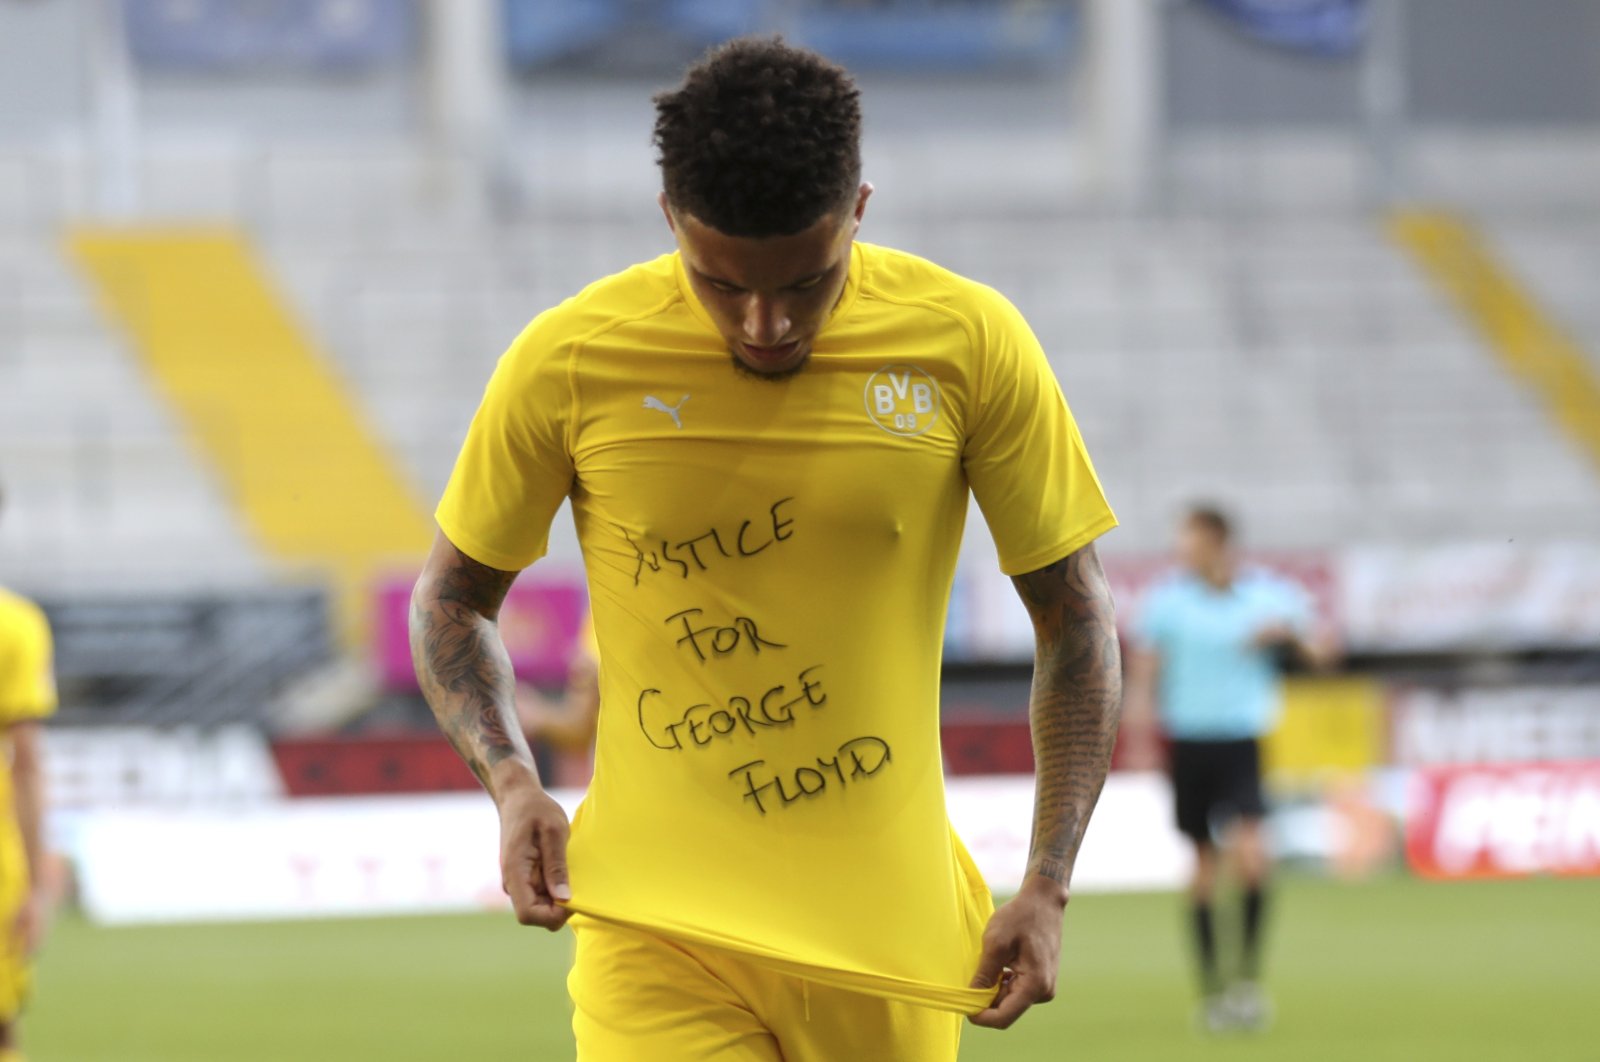 Borussia Dortmund's Jadon Sancho celebrates a goal with a "Justice for George Floyd" shirt during a Bundesliga match in Paderborn, Germany, May 31, 2020. (AP Photo)